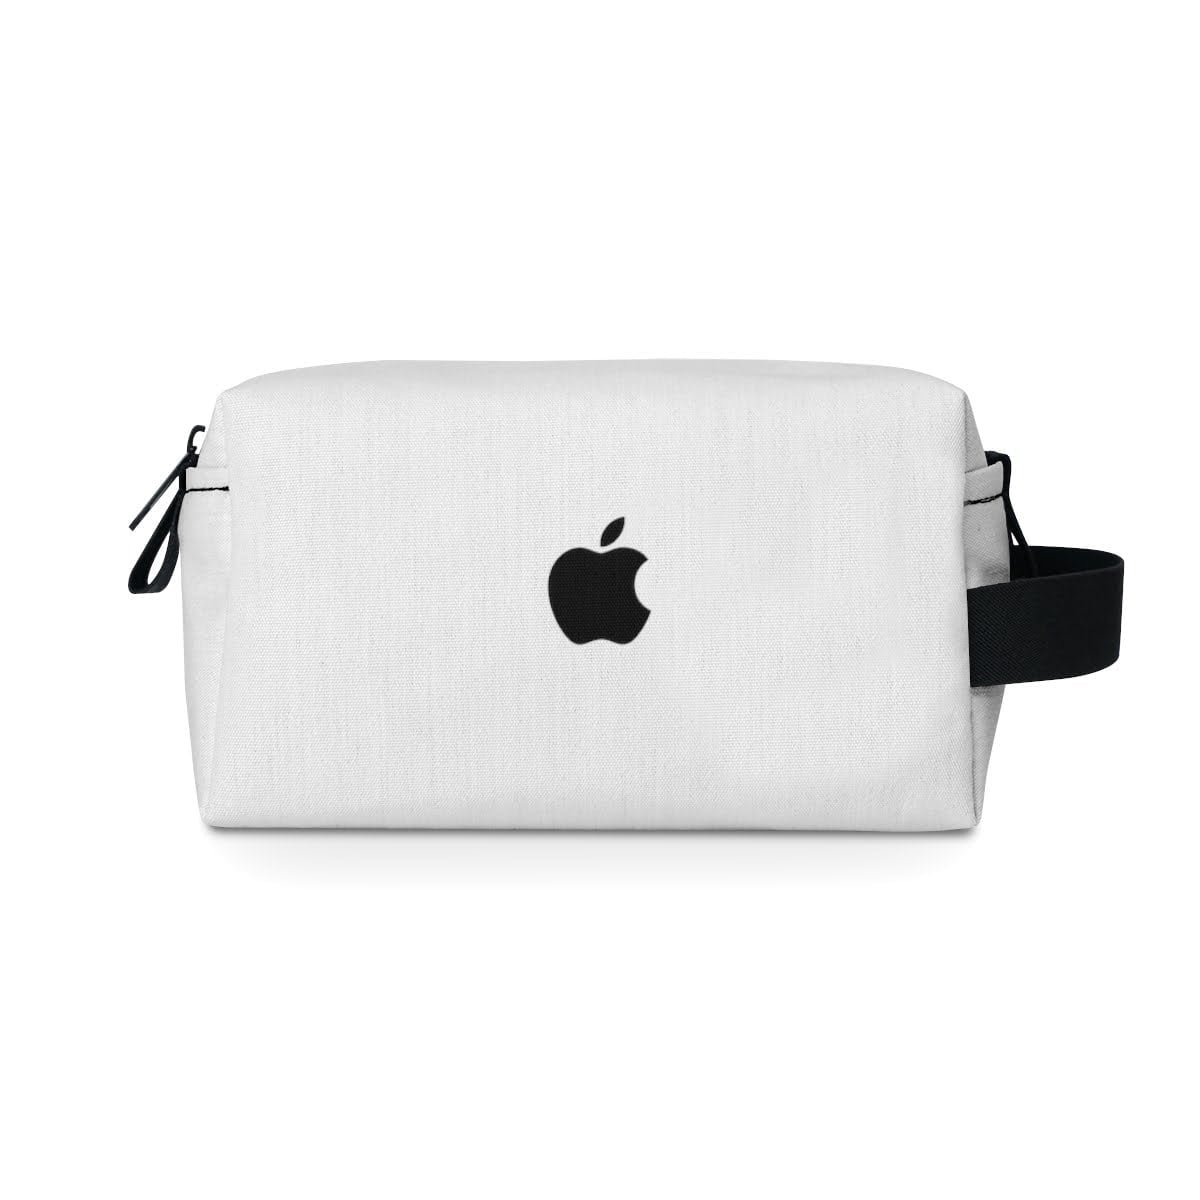 - Apple Toiletry Bag - Camping Bag with Apple logo - NoowAI Shop